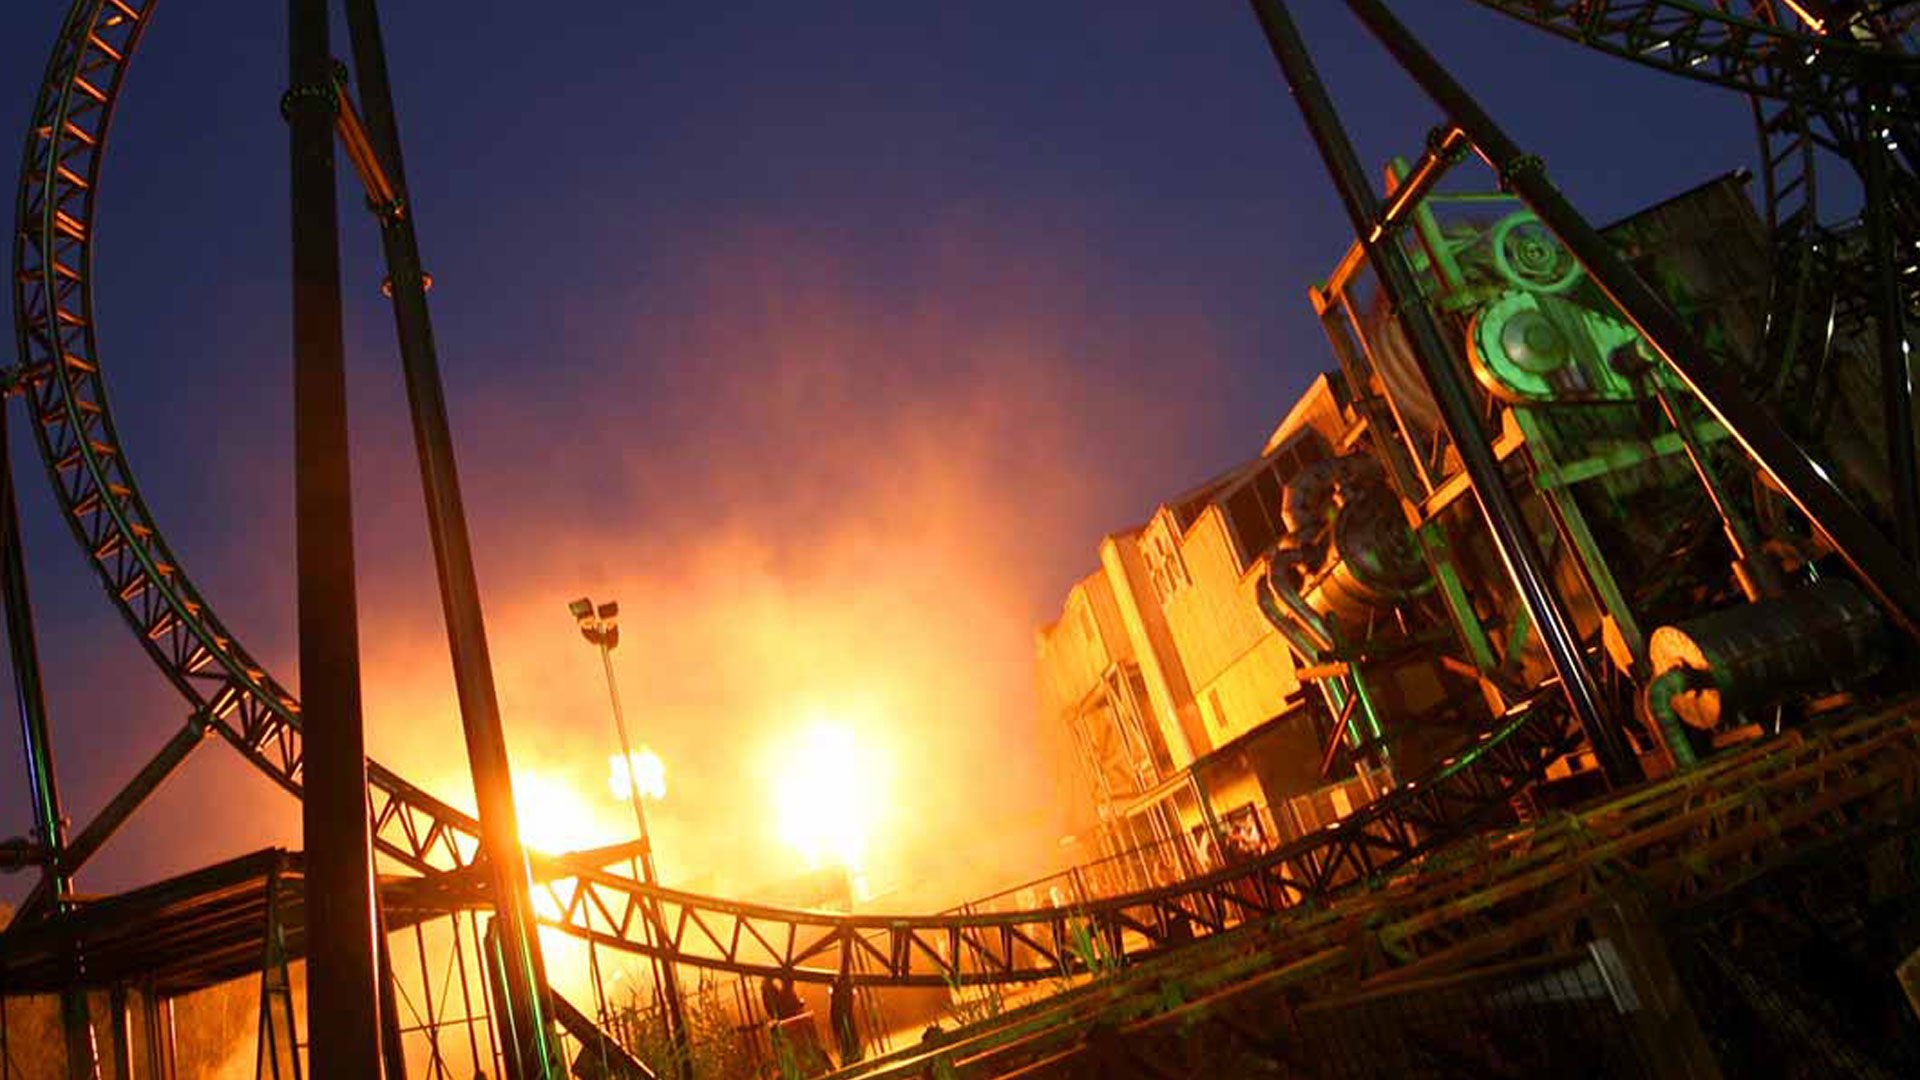 Thorpe Park's Halloween event is back - make a night of it with stays from £89pp